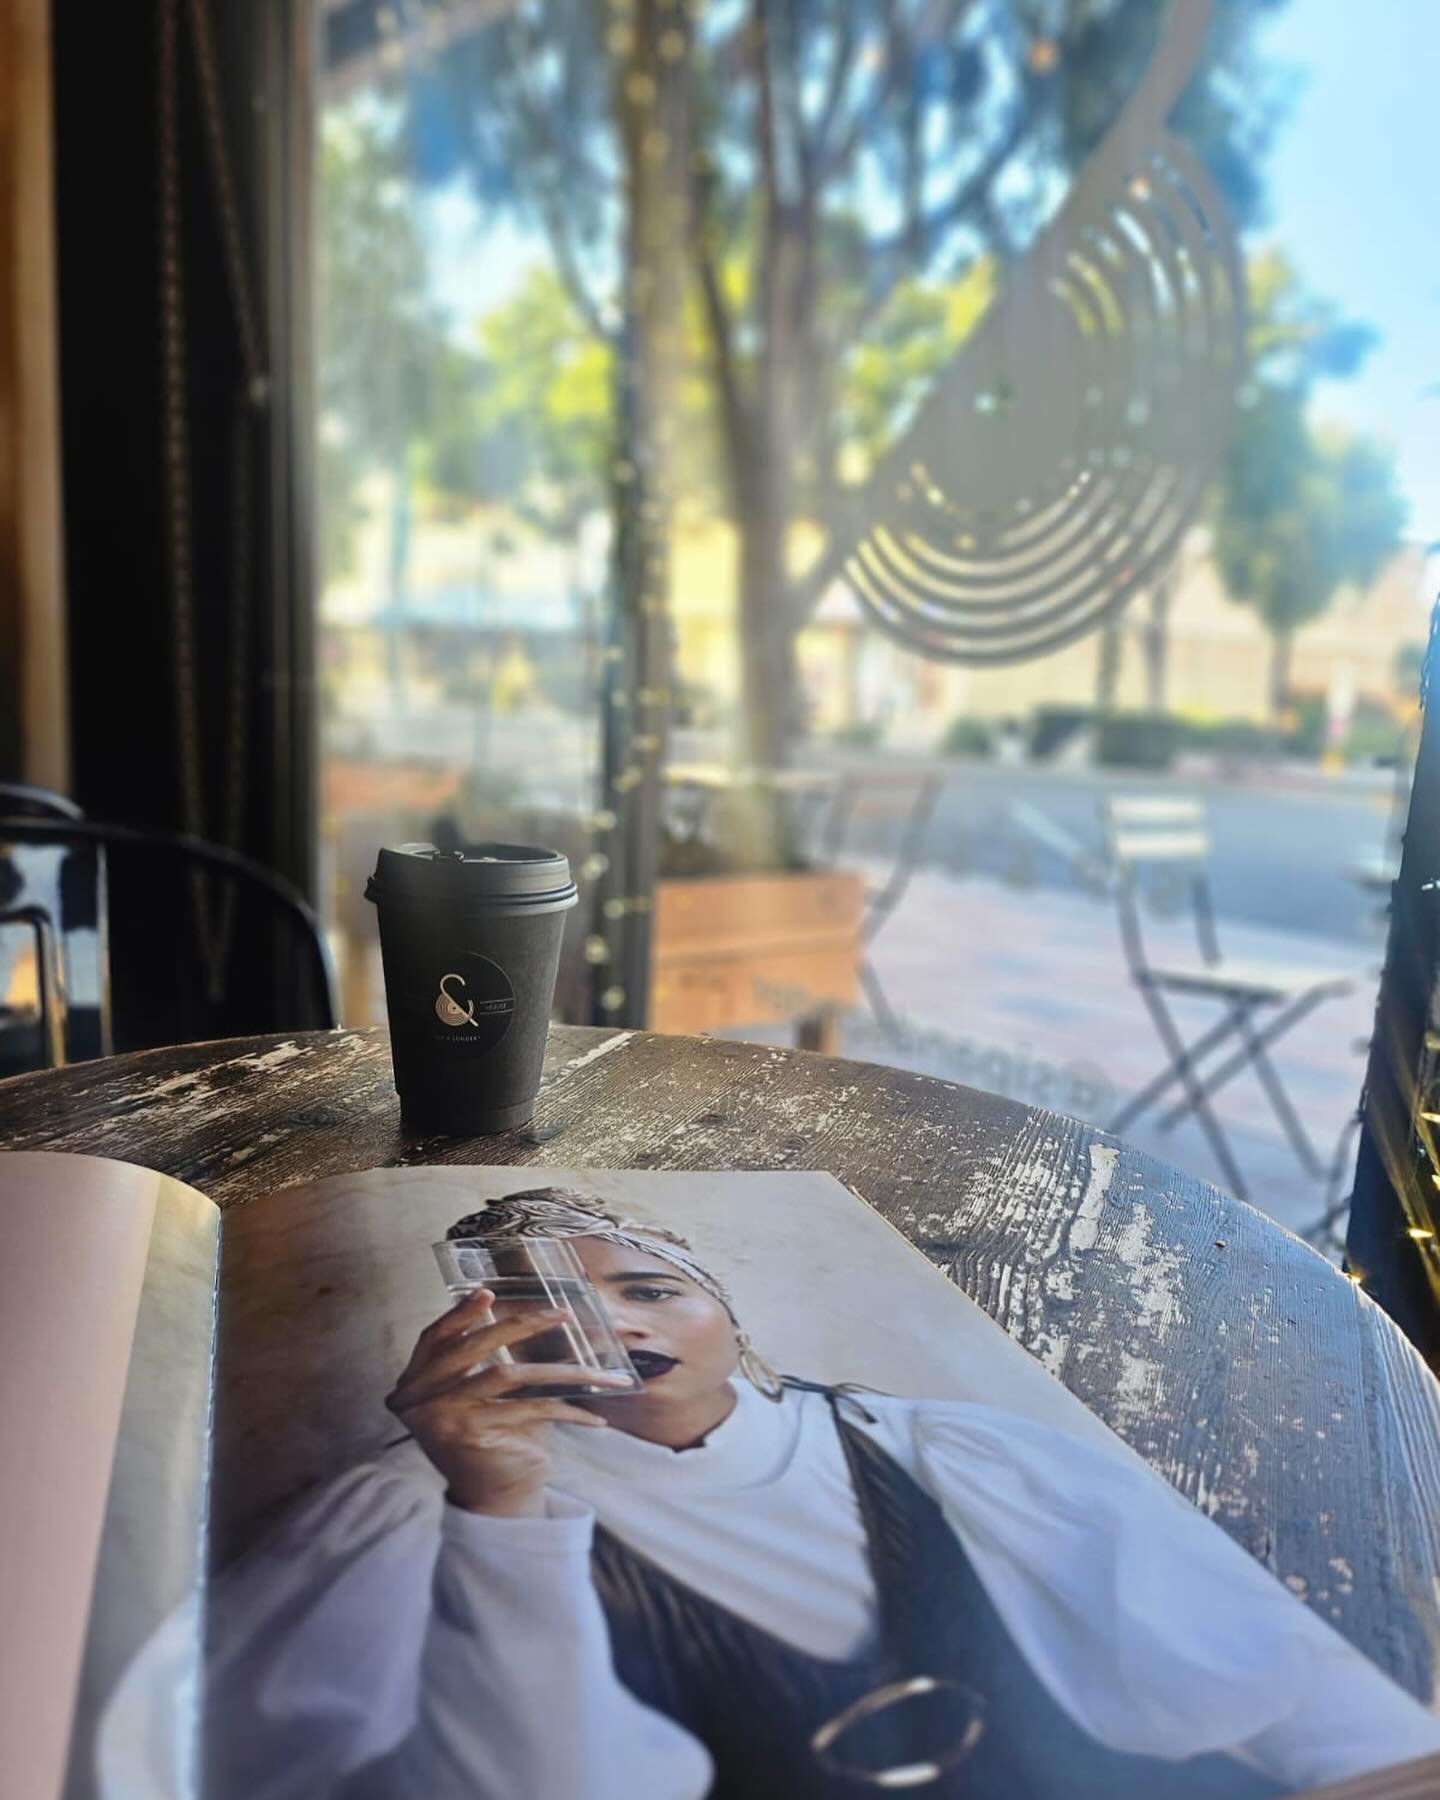 &ldquo;give me a moment&hellip; 
i am adjusting the roses in my tongue.&rdquo; 
&ndash; Nayyirah Waheed
: 
Stop by our Inglewood coffeehouse today.  Take your moment. ☕️✨
:
#SipandSonder #ComeForTheCoffeStayForTheCulture #FortheCommunity #FortheCultu